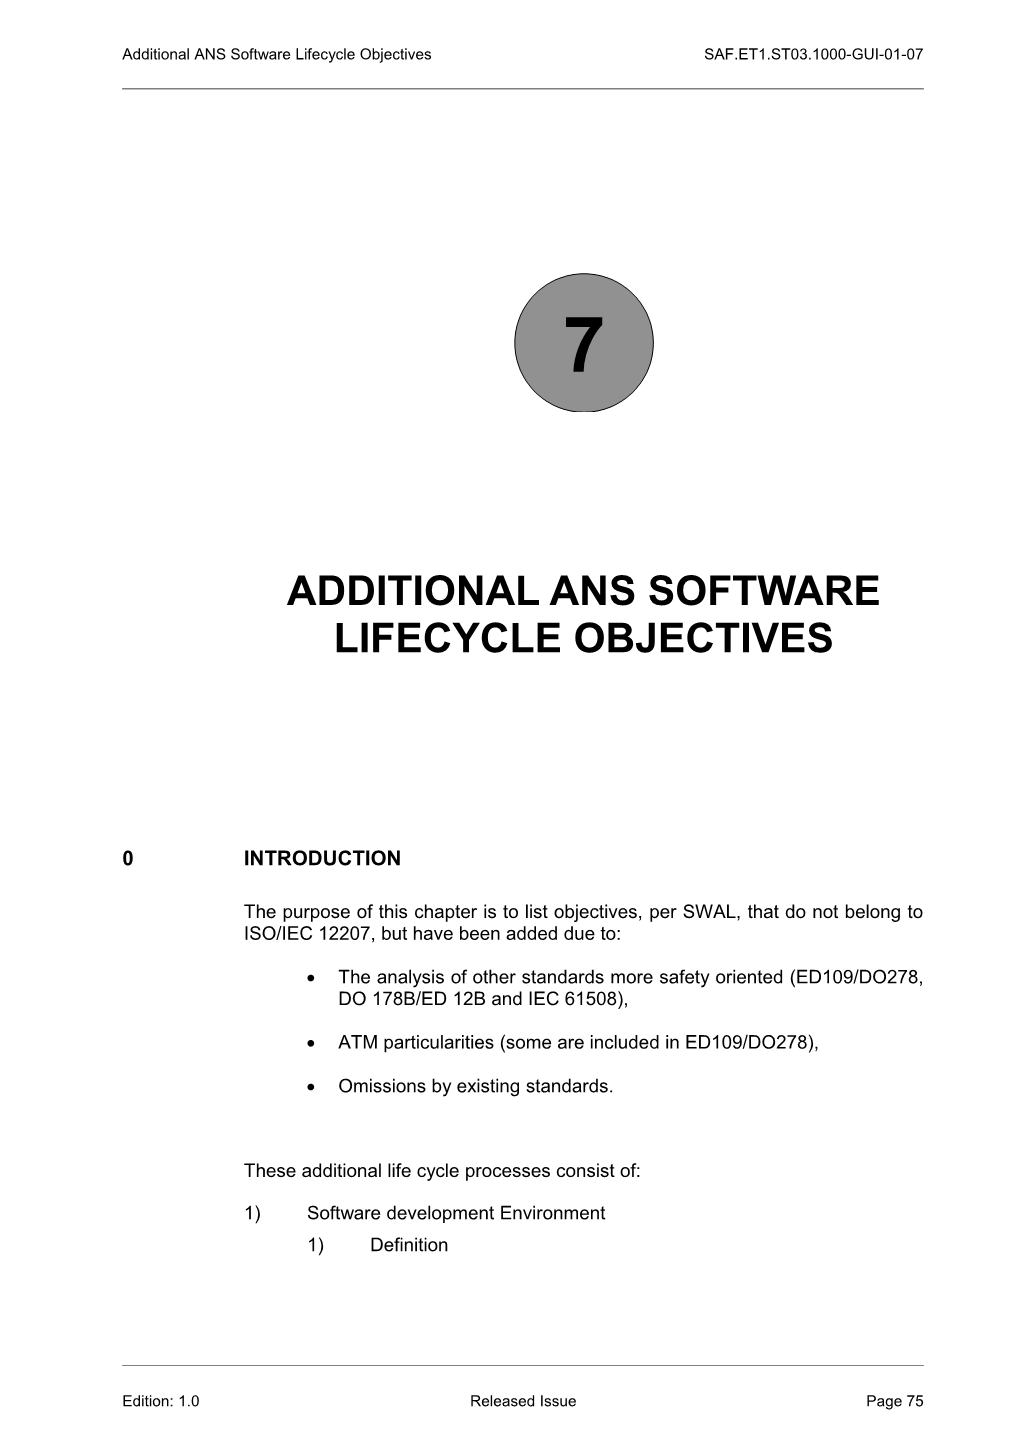 Additional Ans Software Lifecycle Objectives